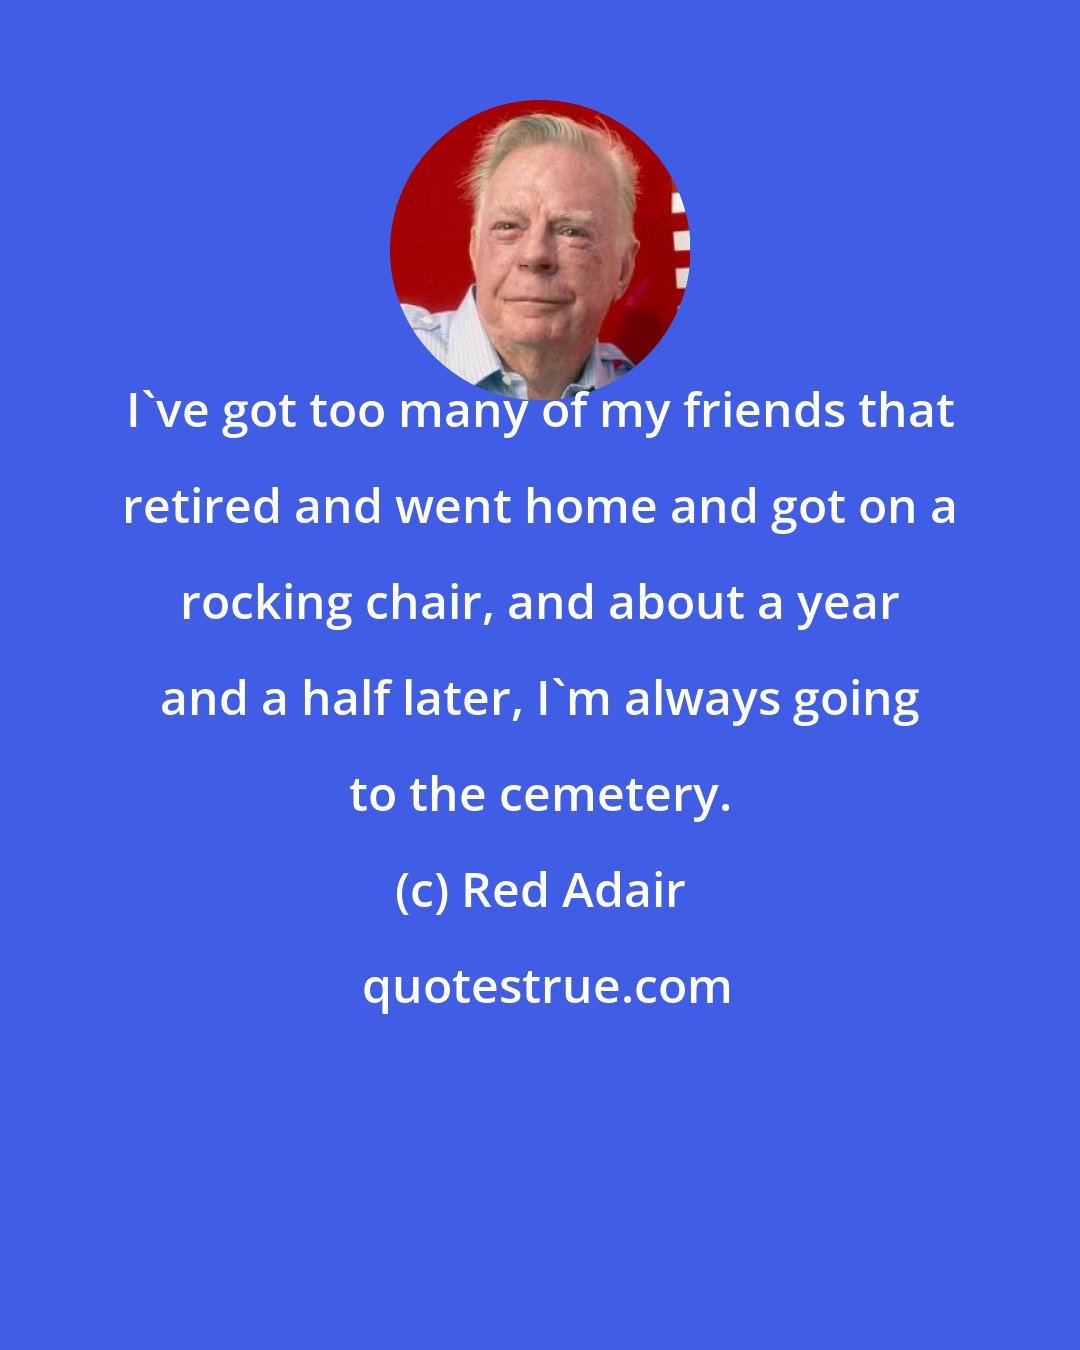 Red Adair: I've got too many of my friends that retired and went home and got on a rocking chair, and about a year and a half later, I'm always going to the cemetery.